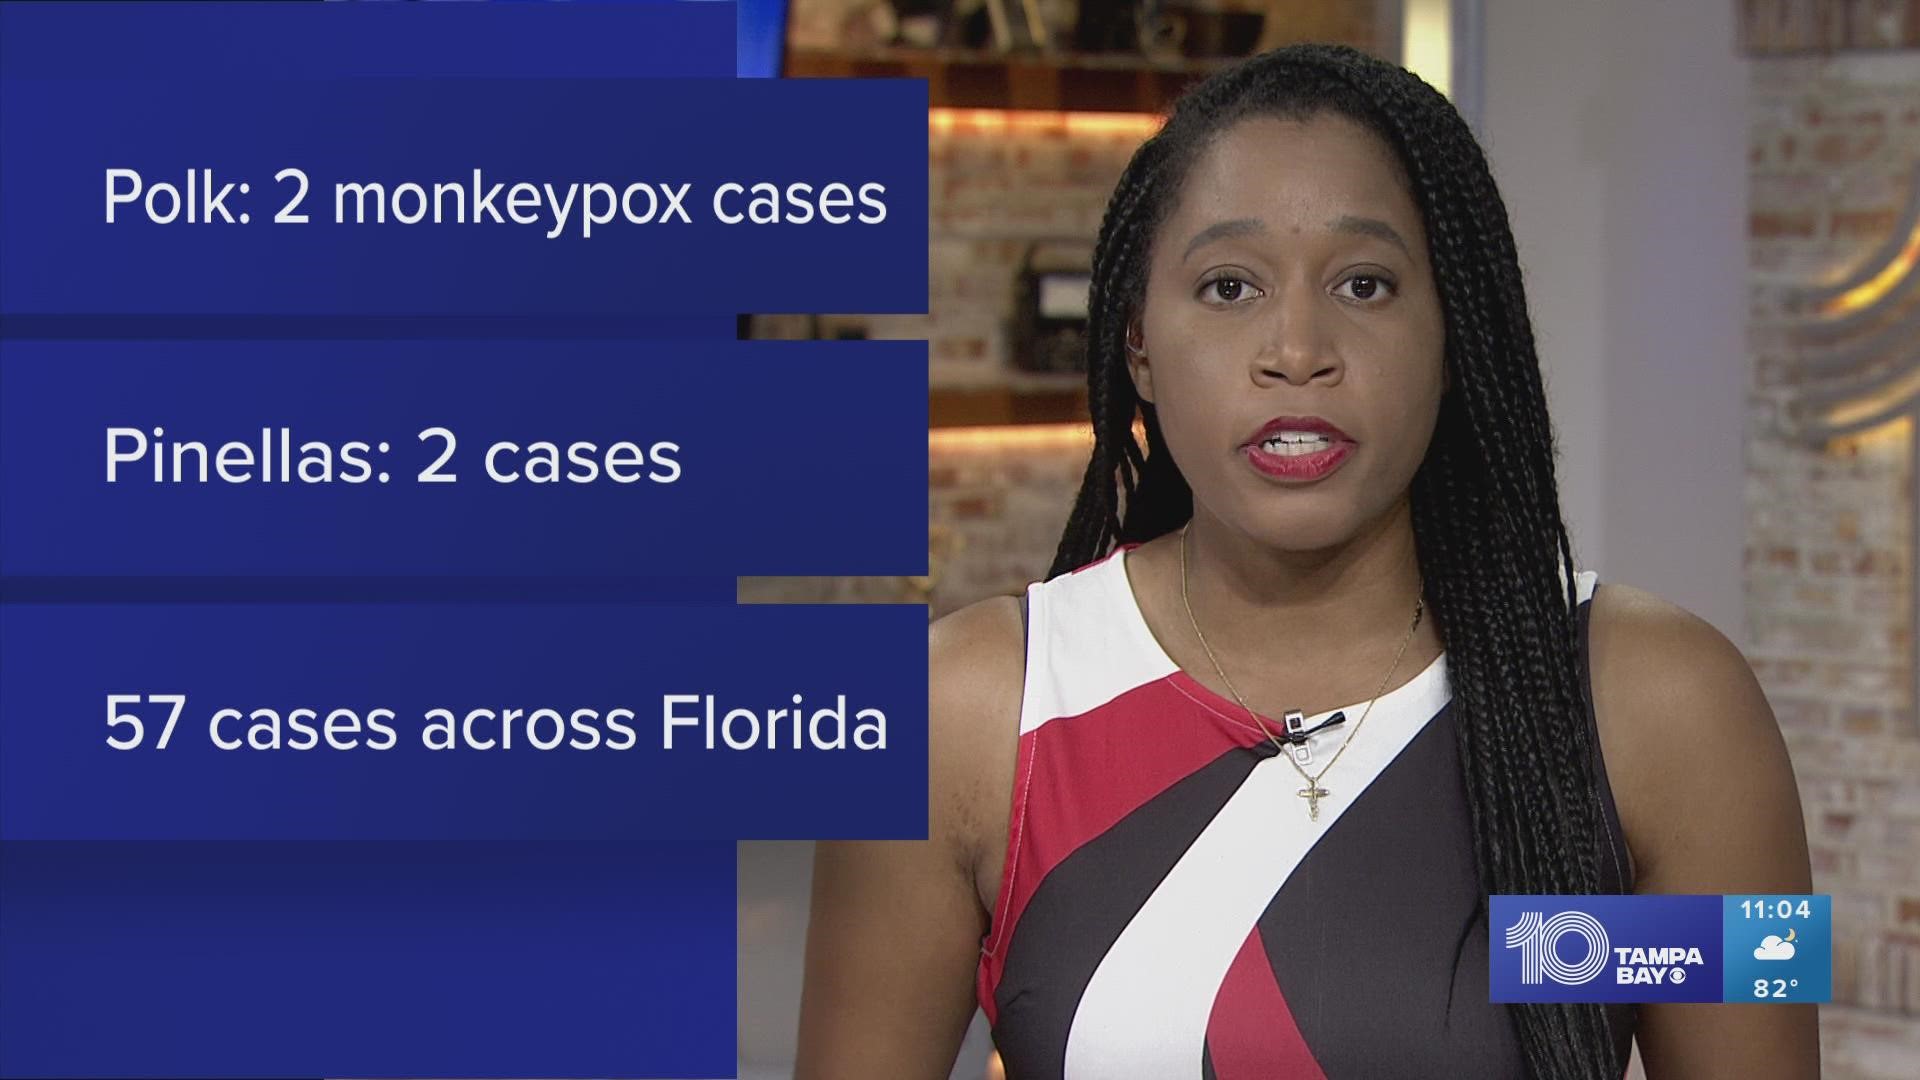 In Florida, there have been 57 cases of monkeypox, the state's department of health says.